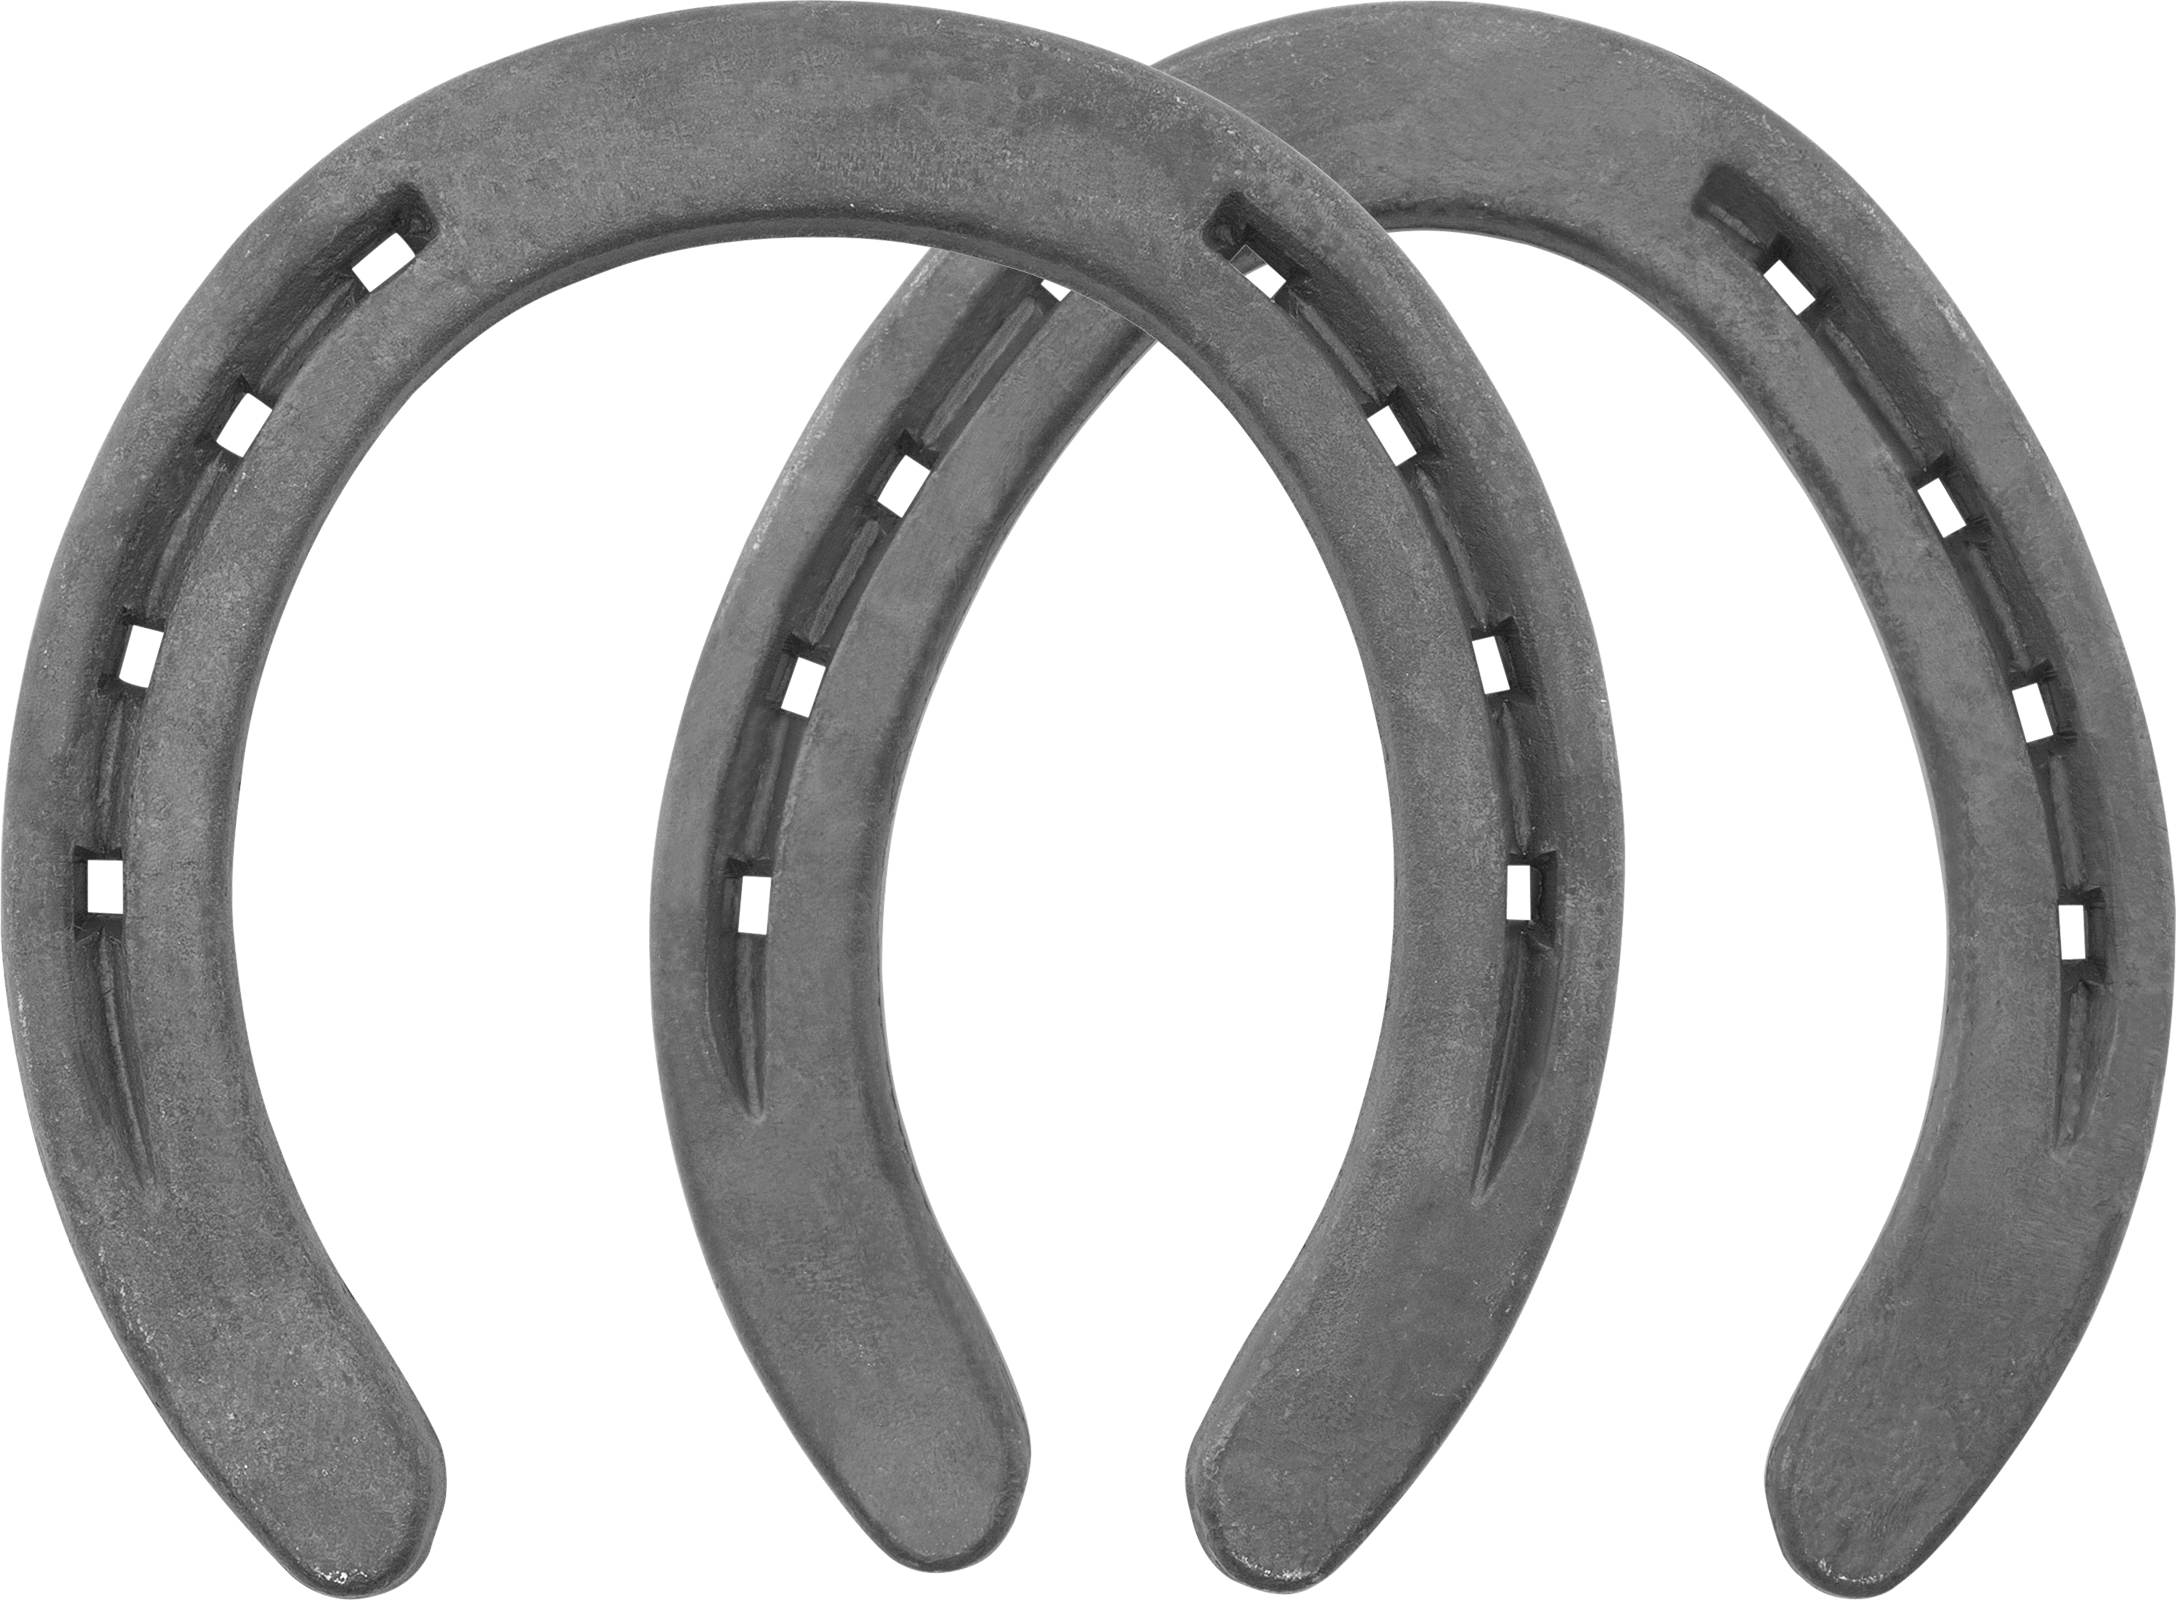 St. Croix Surefit horseshoes, front and hind, bottom view